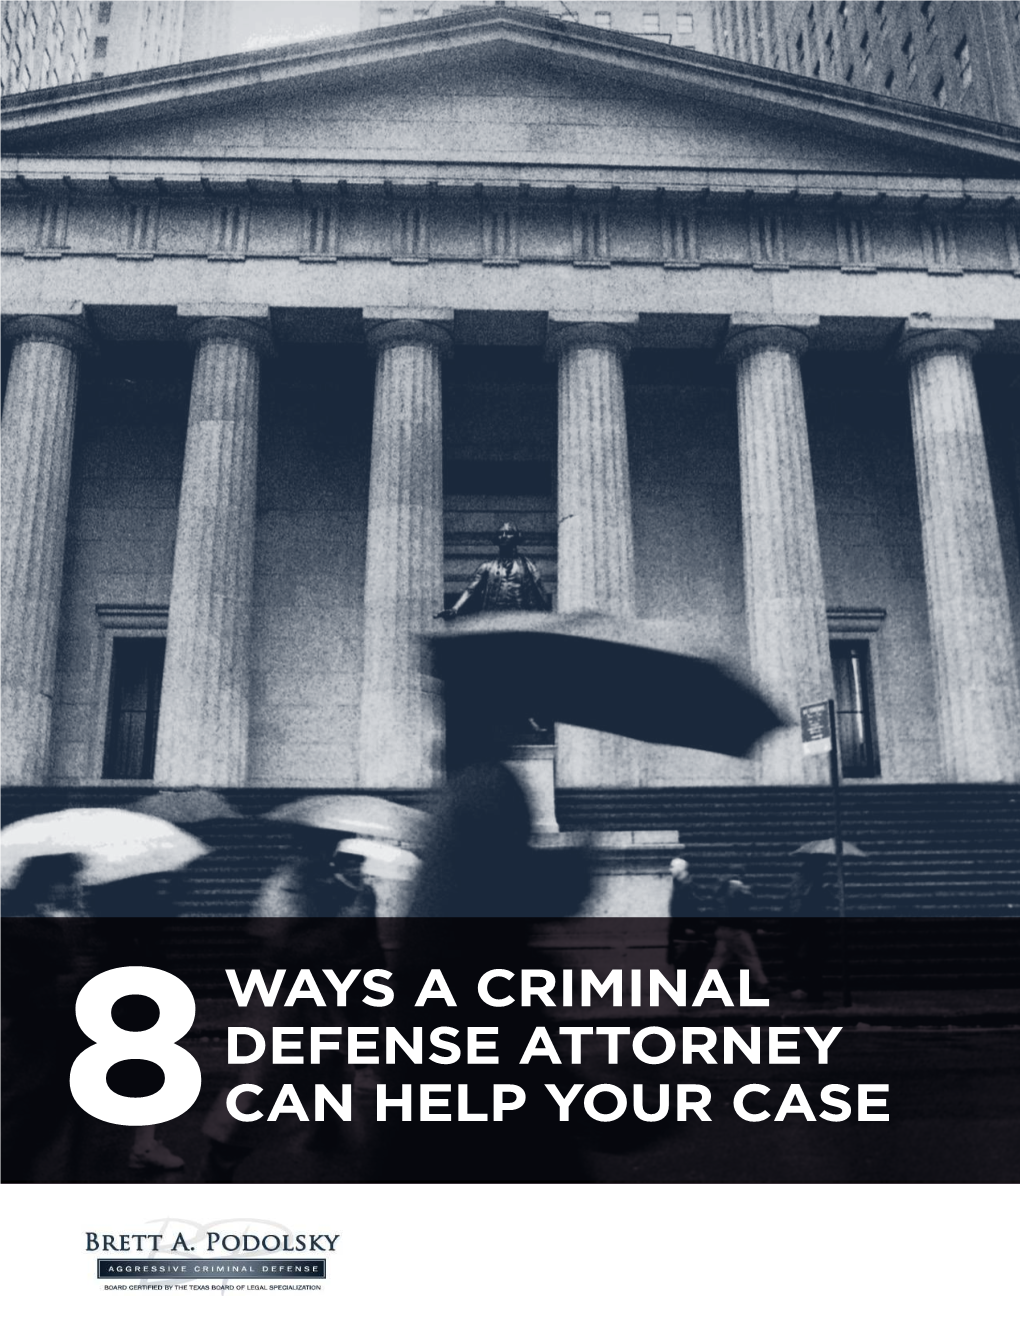 Ways a Criminal Defense Attorney Can Help Your Case